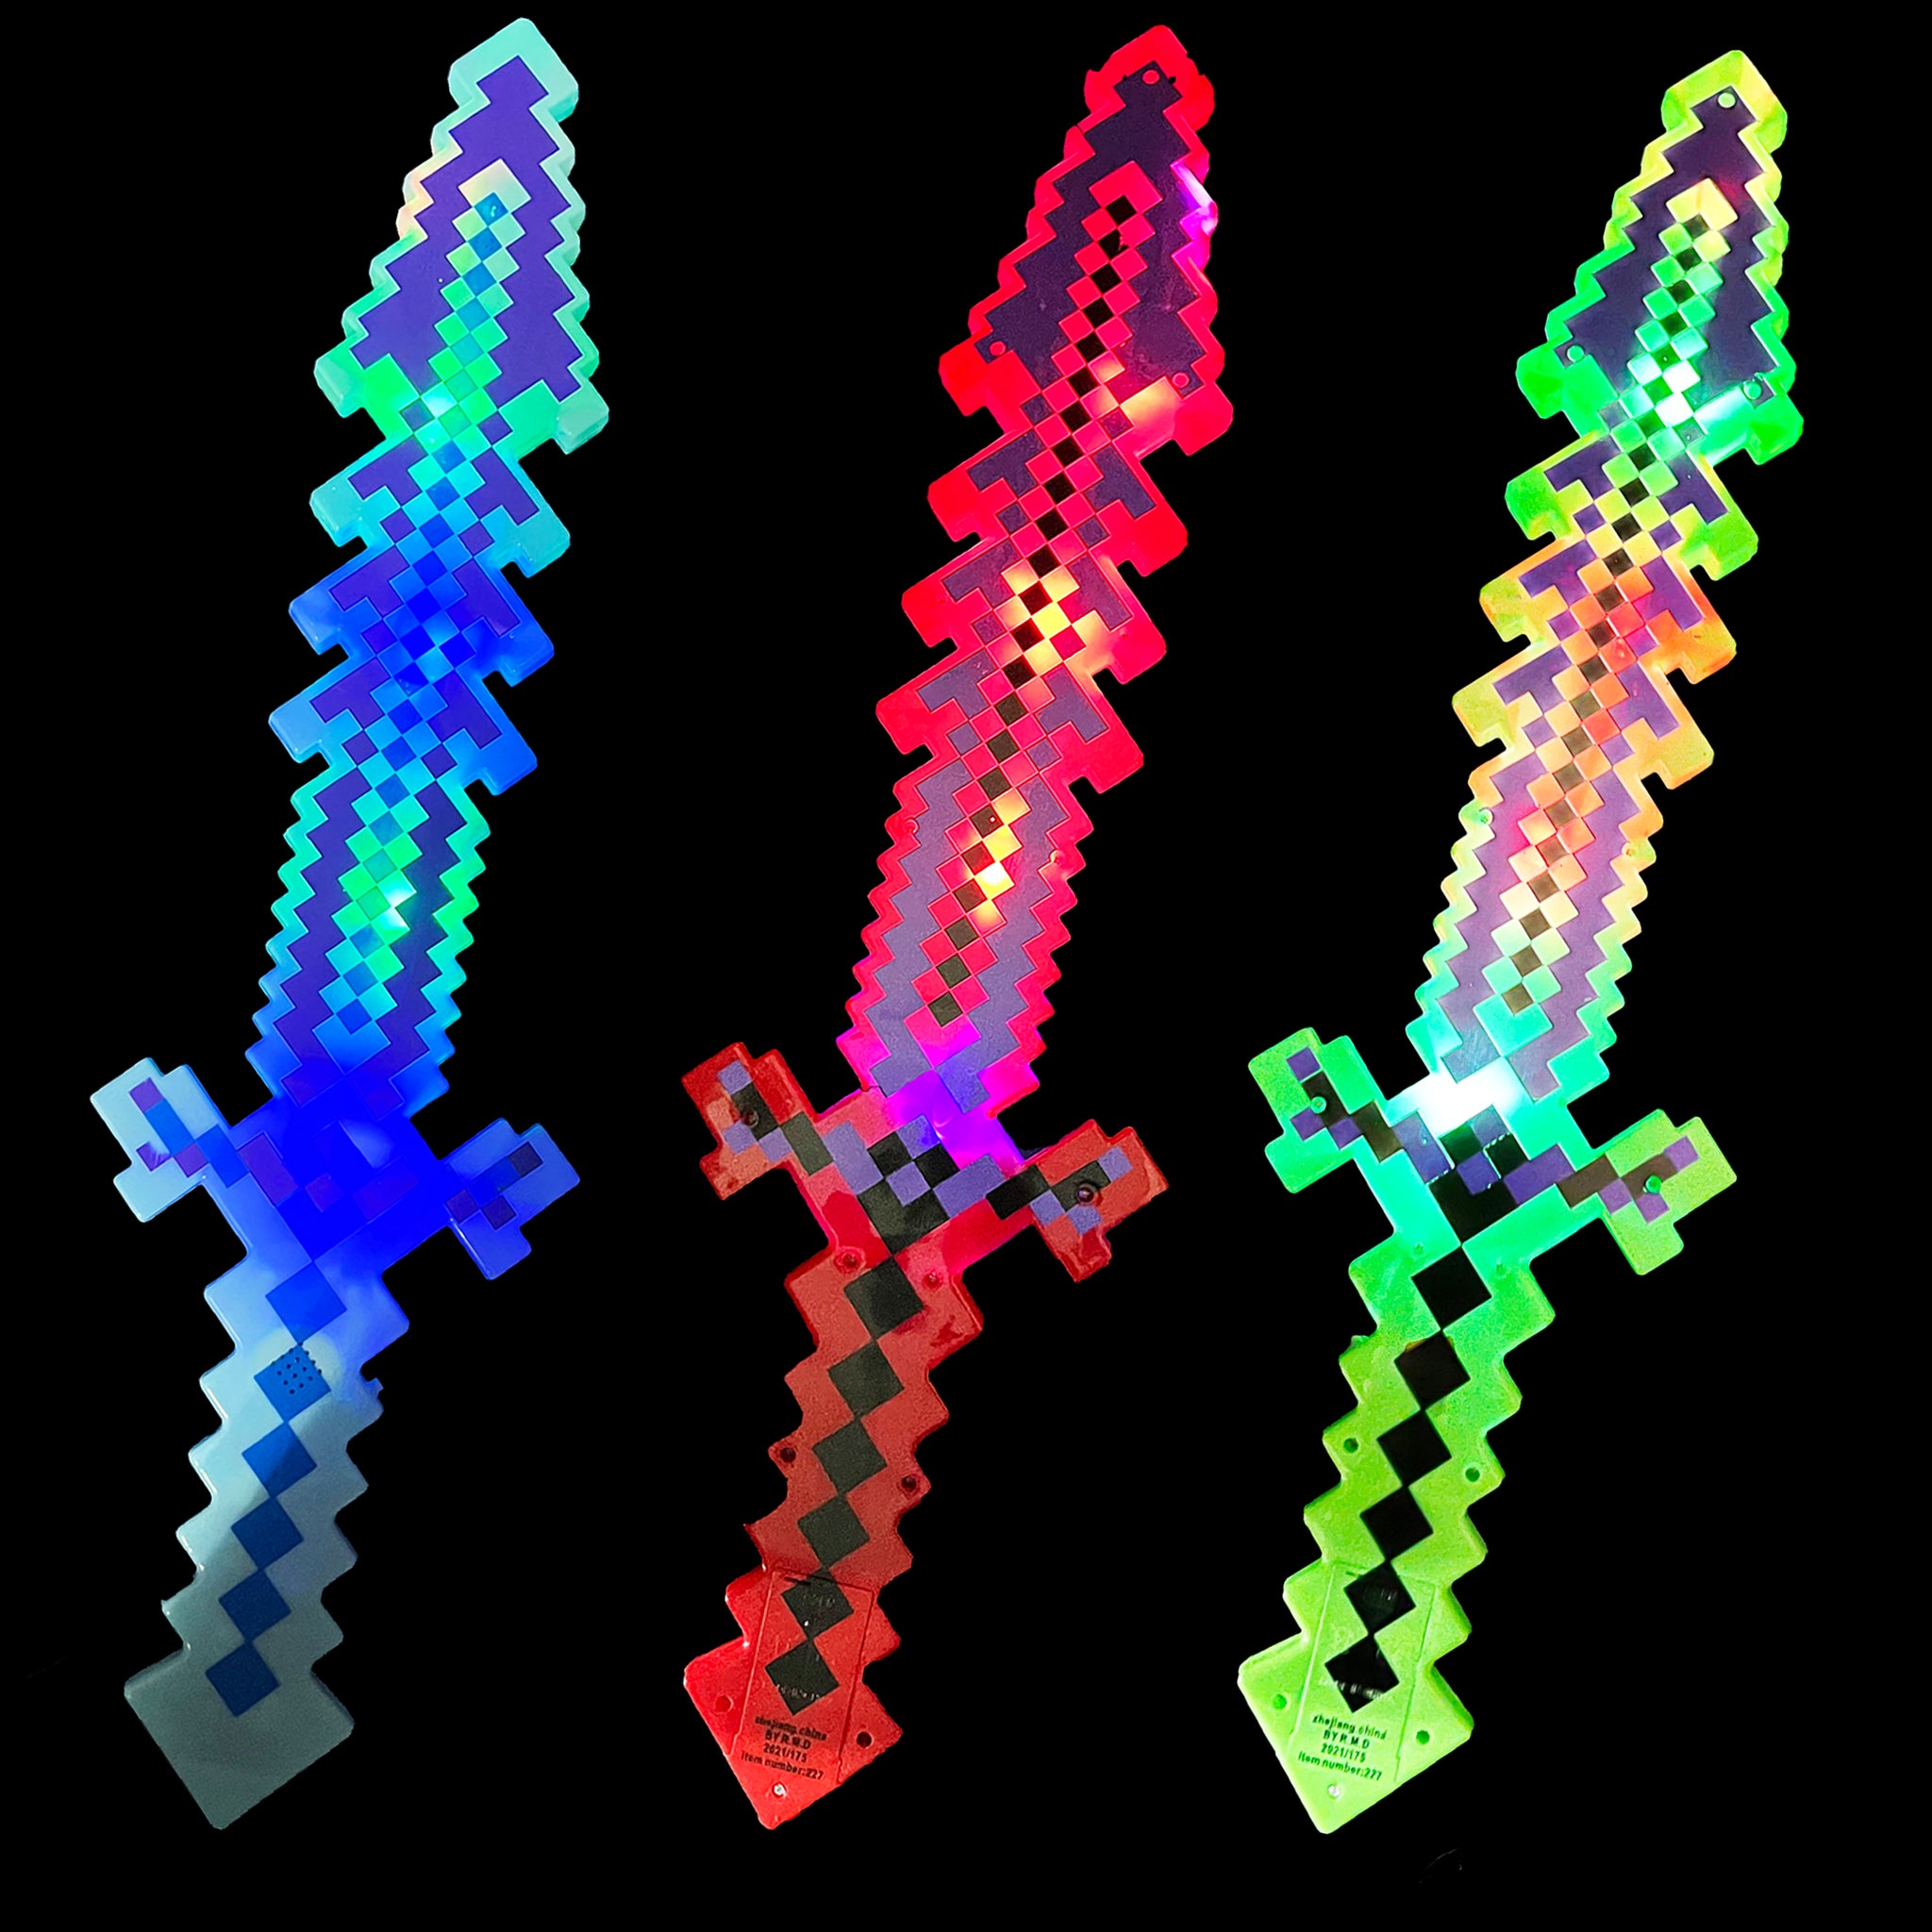 Led Pixel Sword with sound